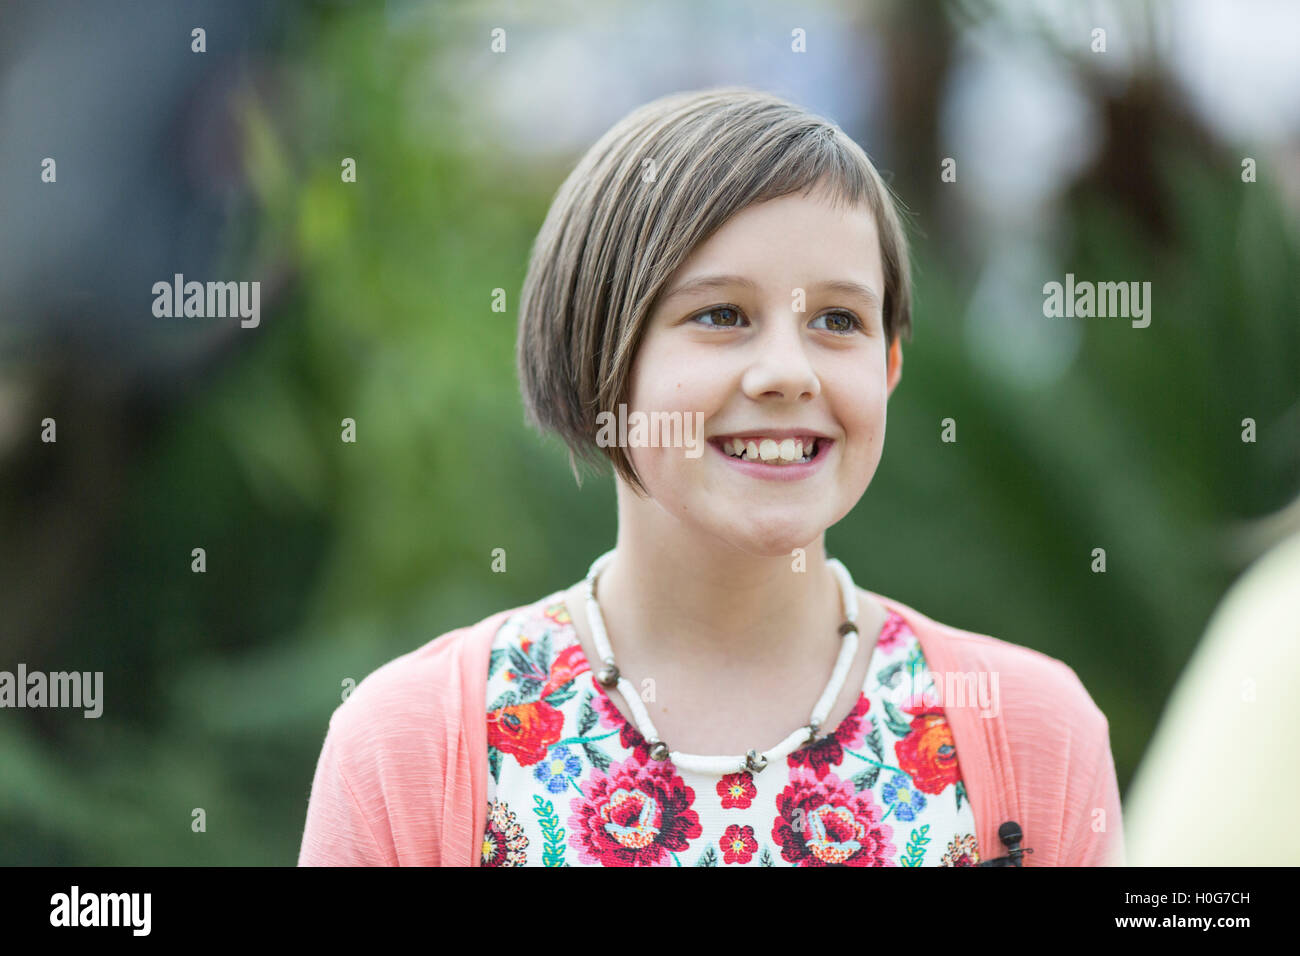 Ruby Barnhill ,English actress, played the lead role of Sophie in Steven Spielberg's 2016 film The BFG. Pictured July 2016 Stock Photo